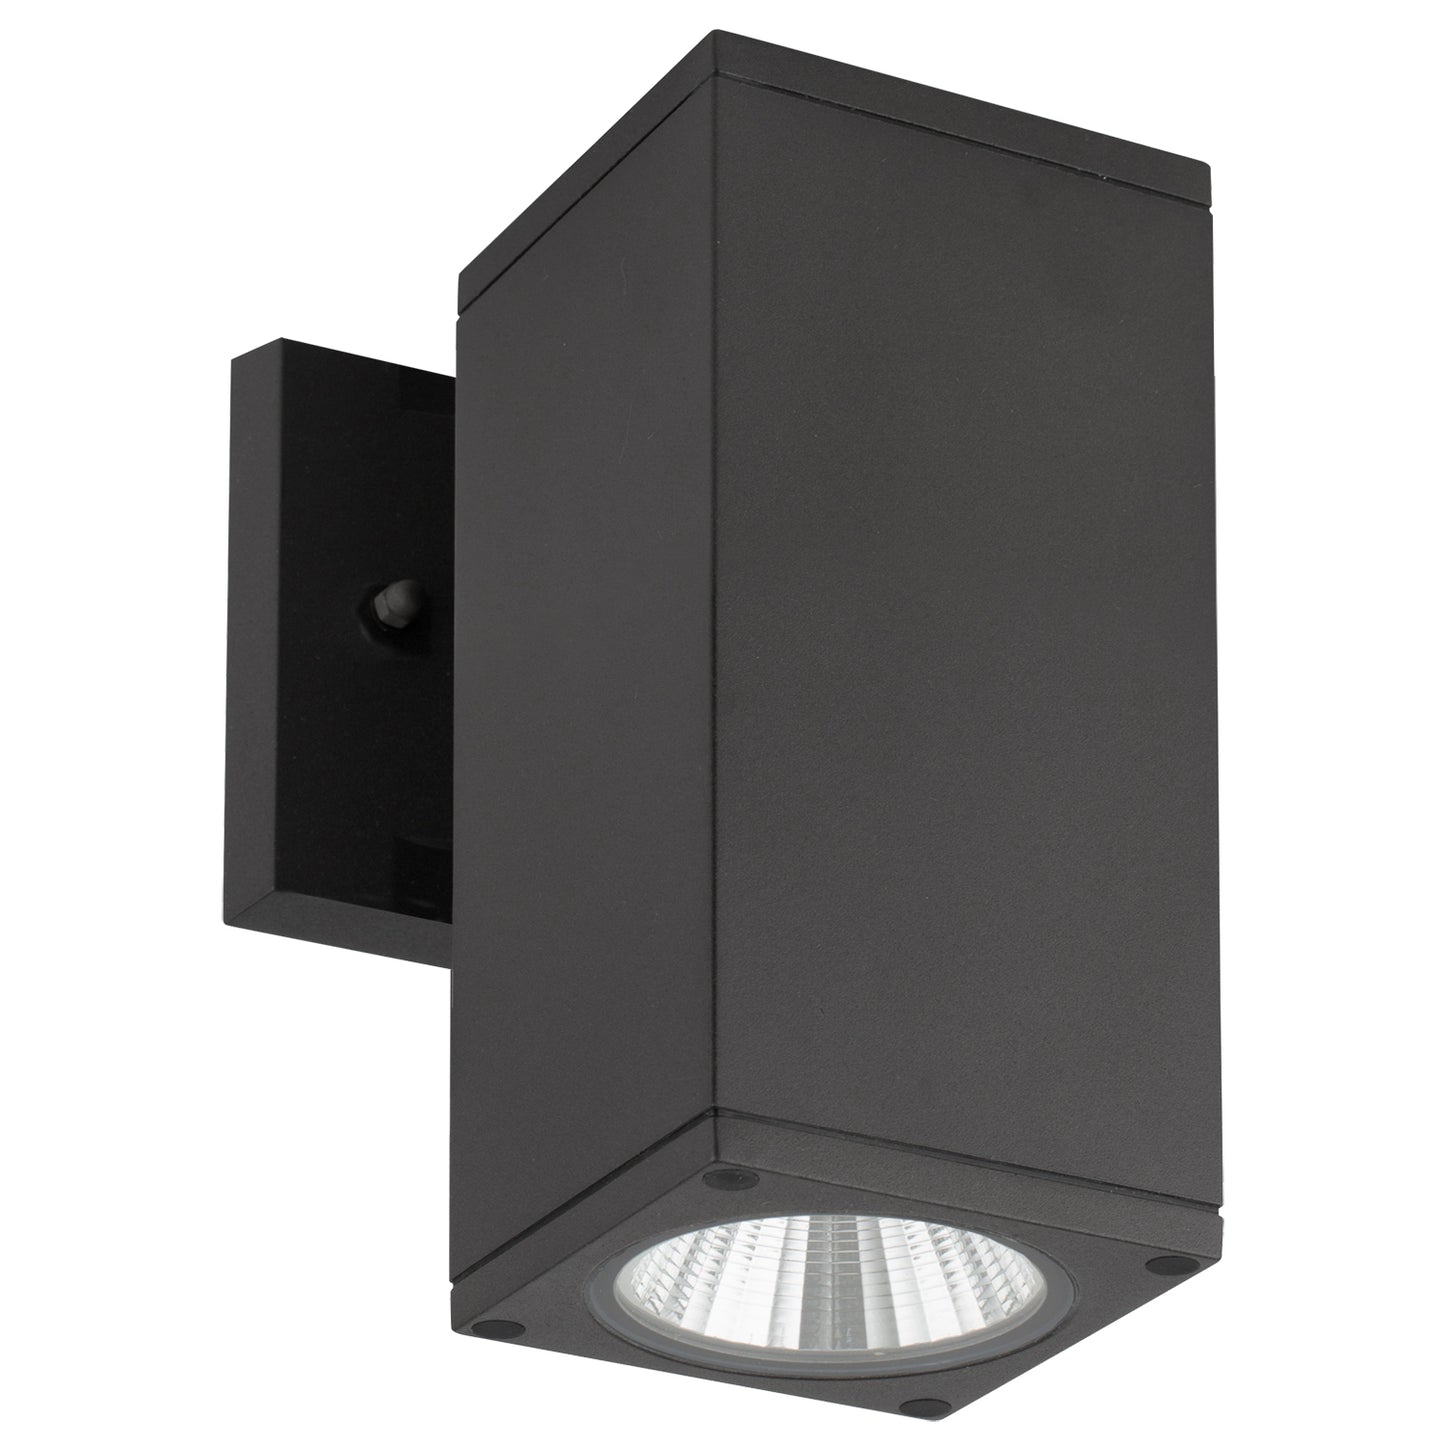 LED Square Up Or Down Outdoor Wall Light Fixture, 12 Watts(60W=), 850 Lumens, Color Tunable 30K/40K/50K, 120-277v, ETL Listed, Black, for Residential & Commercial Use